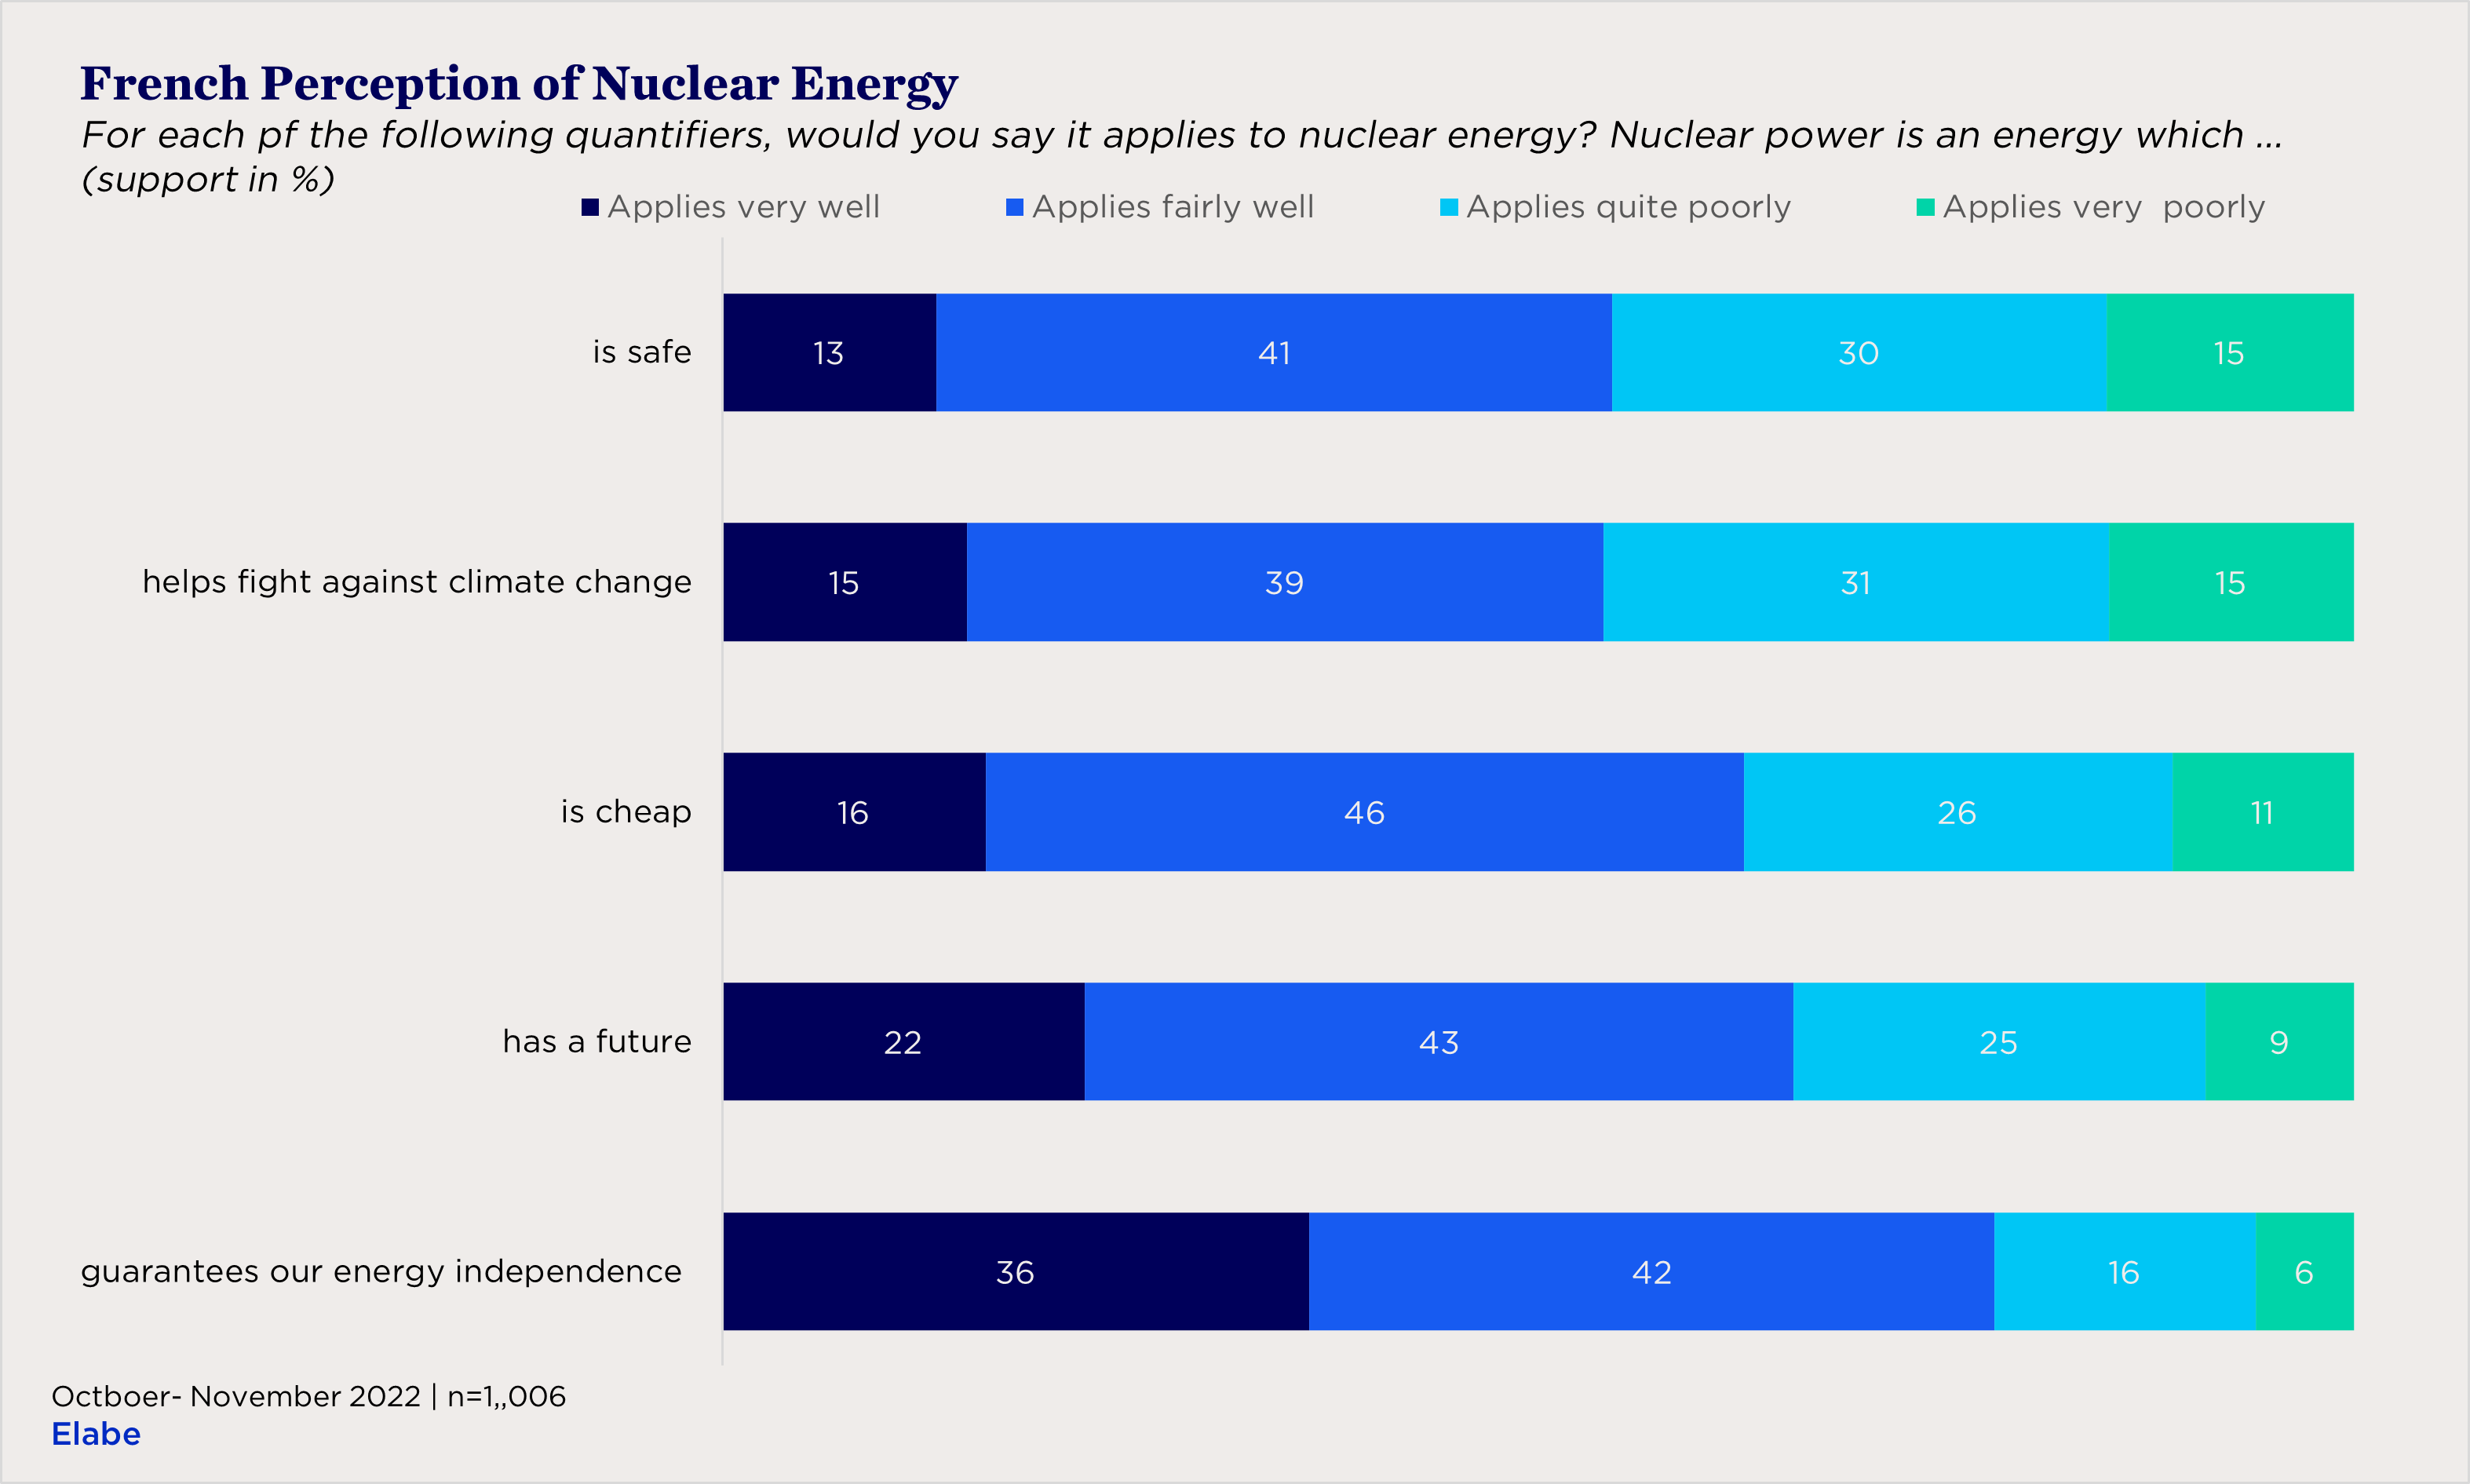 bar chart showing French perceptions of nuclear energy